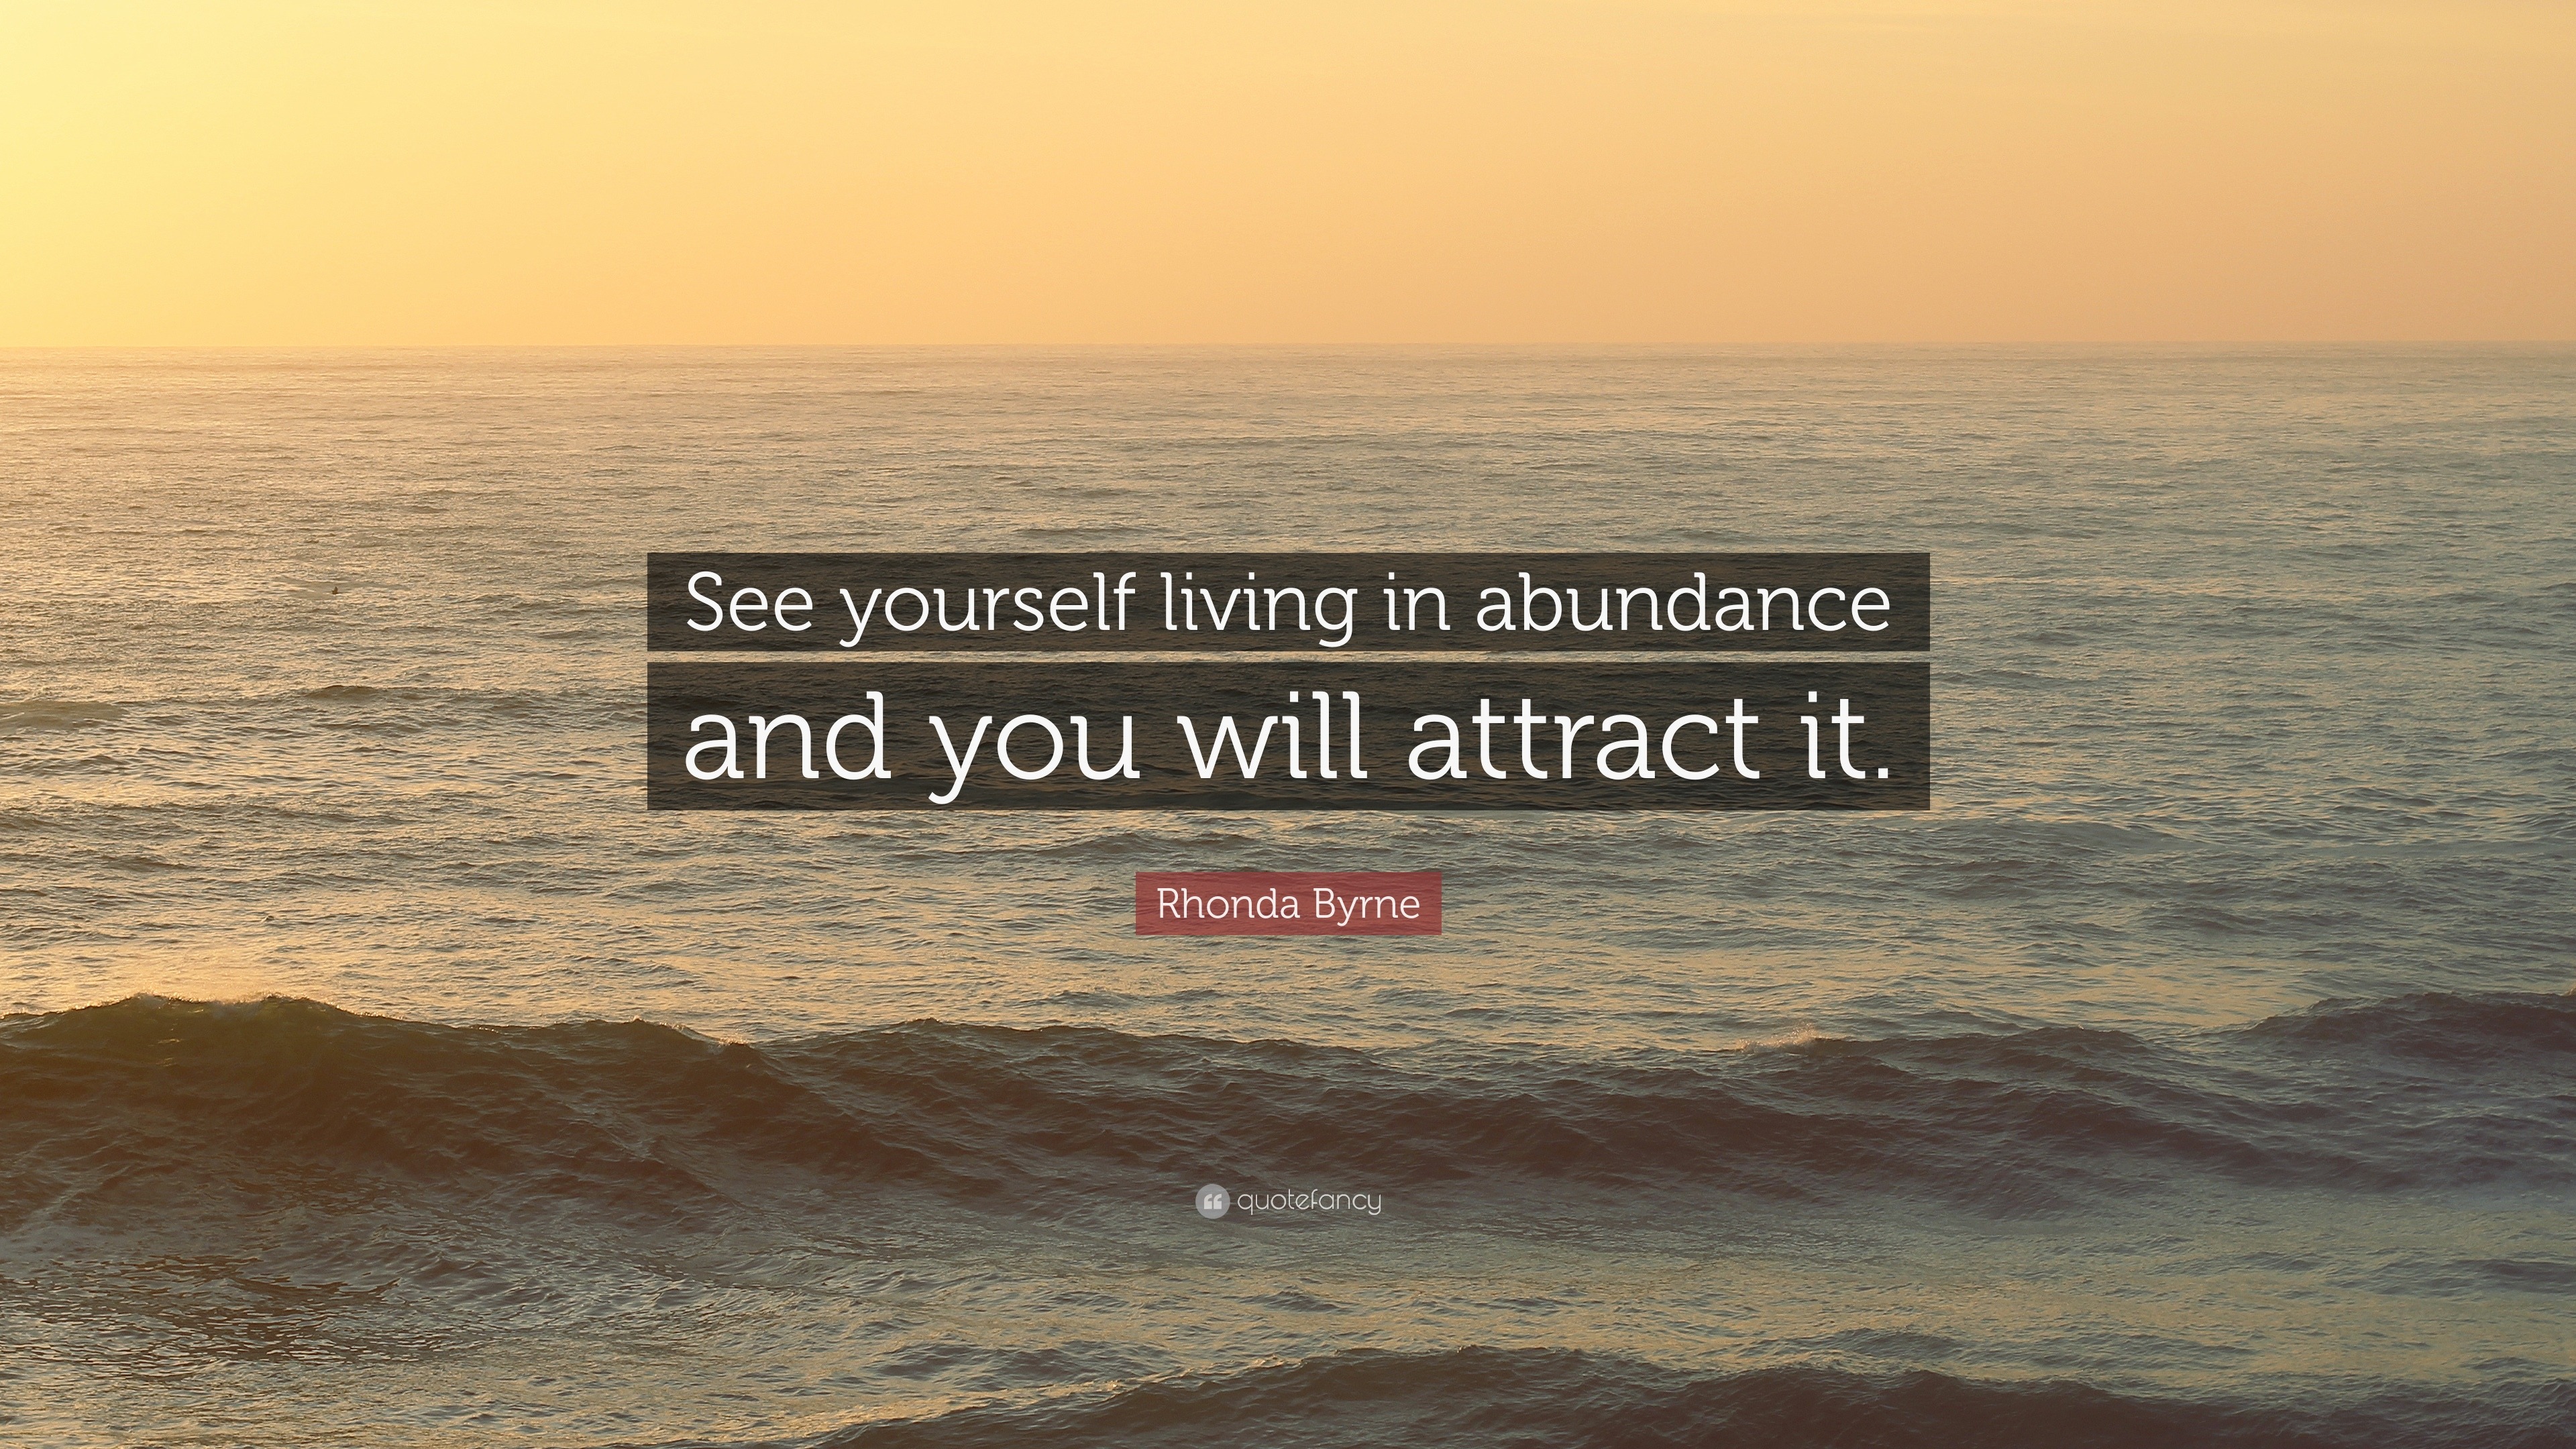 1781867-Rhonda-Byrne-Quote-See-yourself-living-in-abundance-and-you-will.jpg